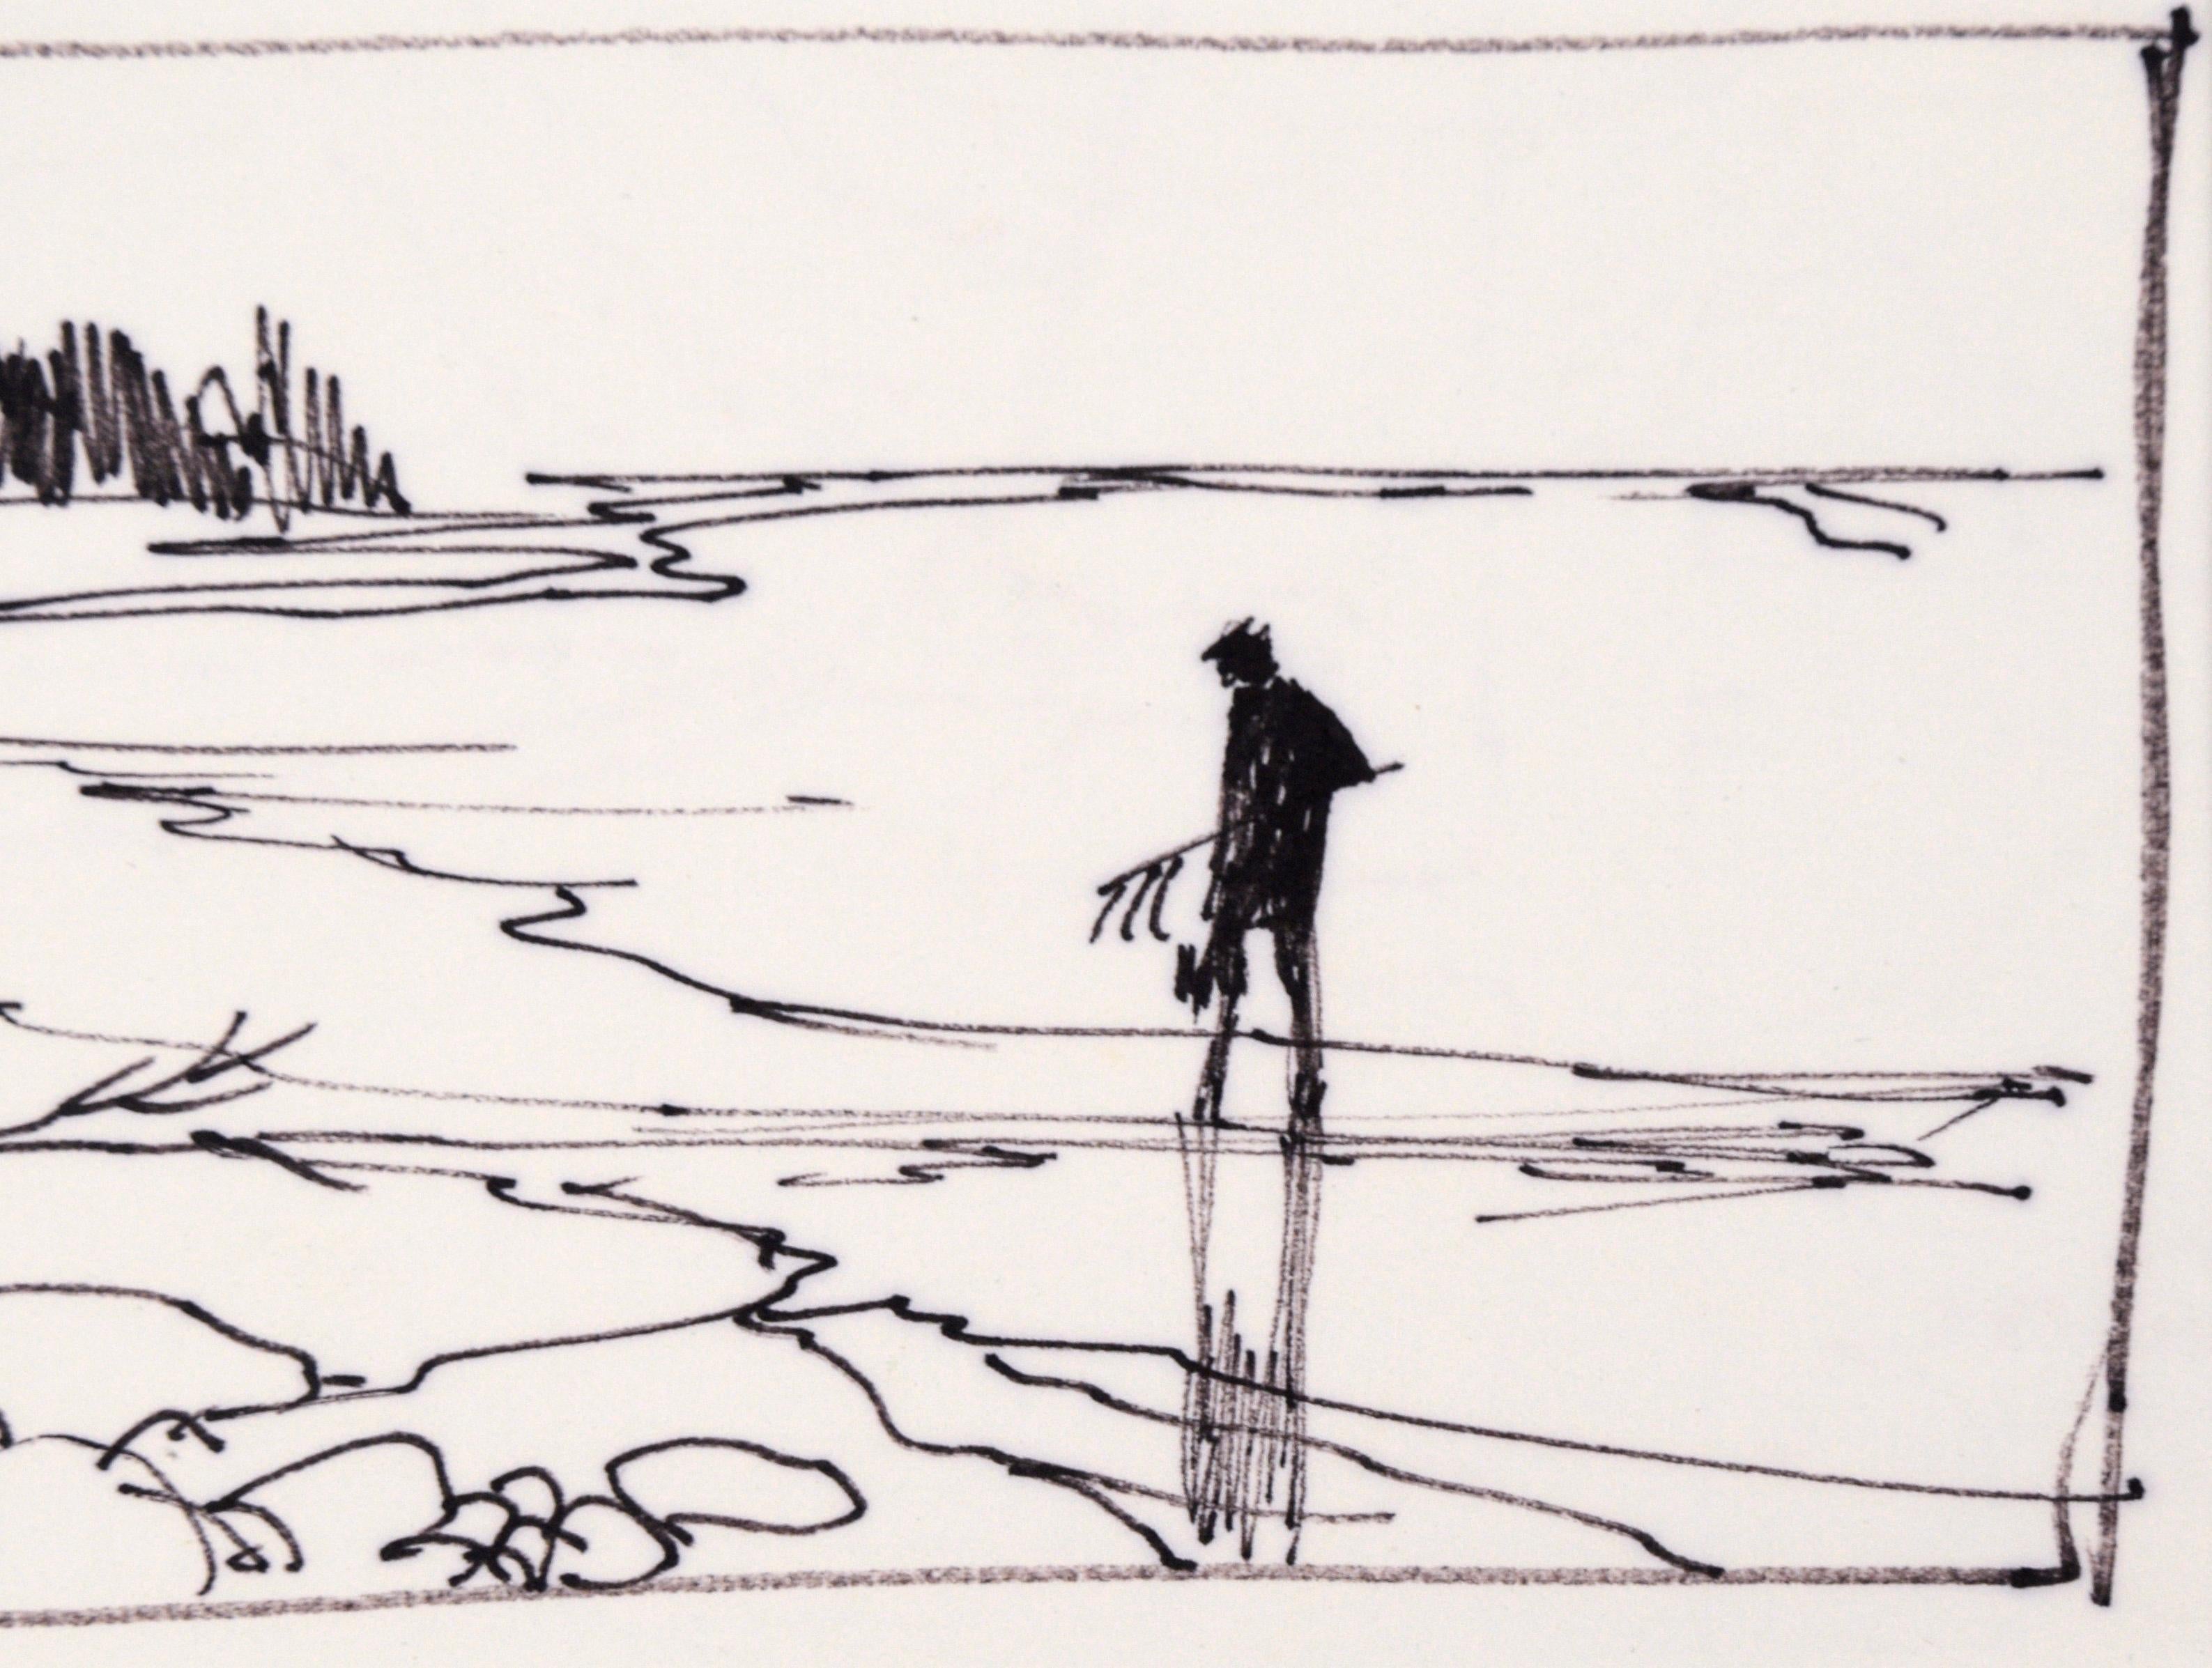 Beachcomber  with Clam Rake - Line Drawing Landscape in Ink on Paper - Black Figurative Art by Laurence Sisson